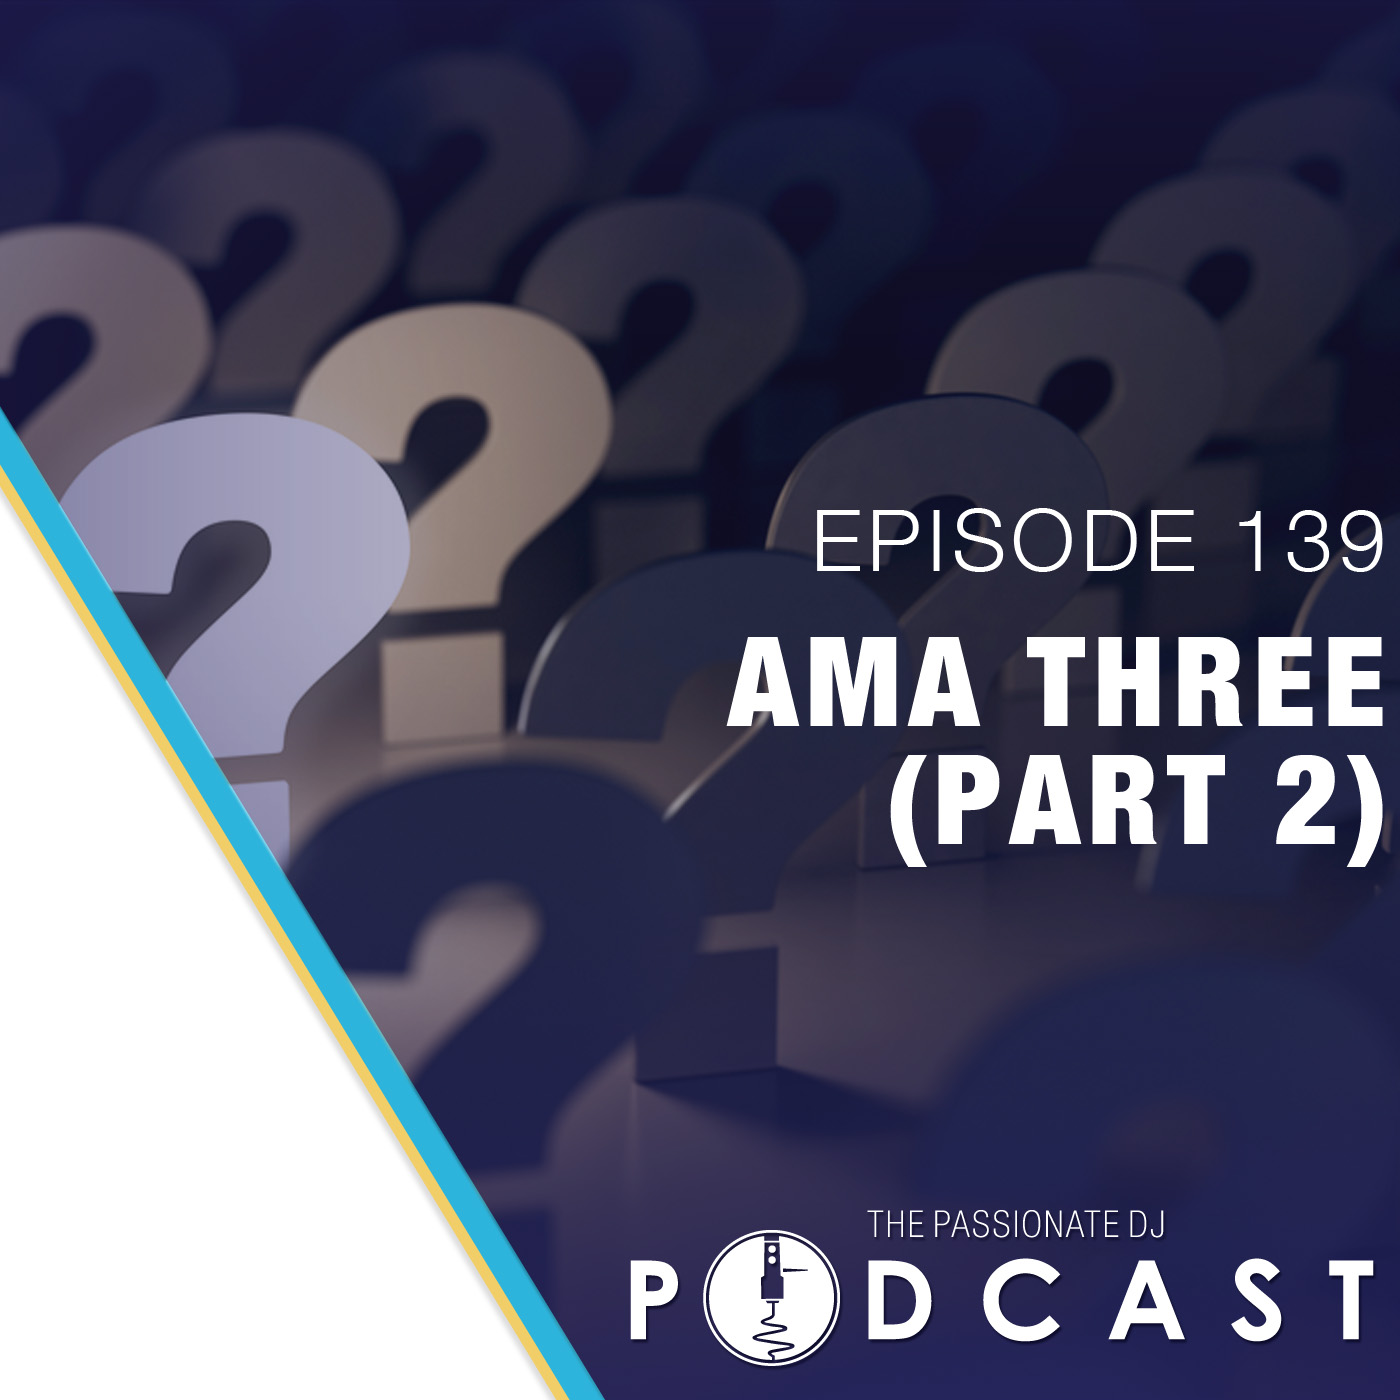 Episode 139: AMA (Ask Us Anything) Three (Part 2)